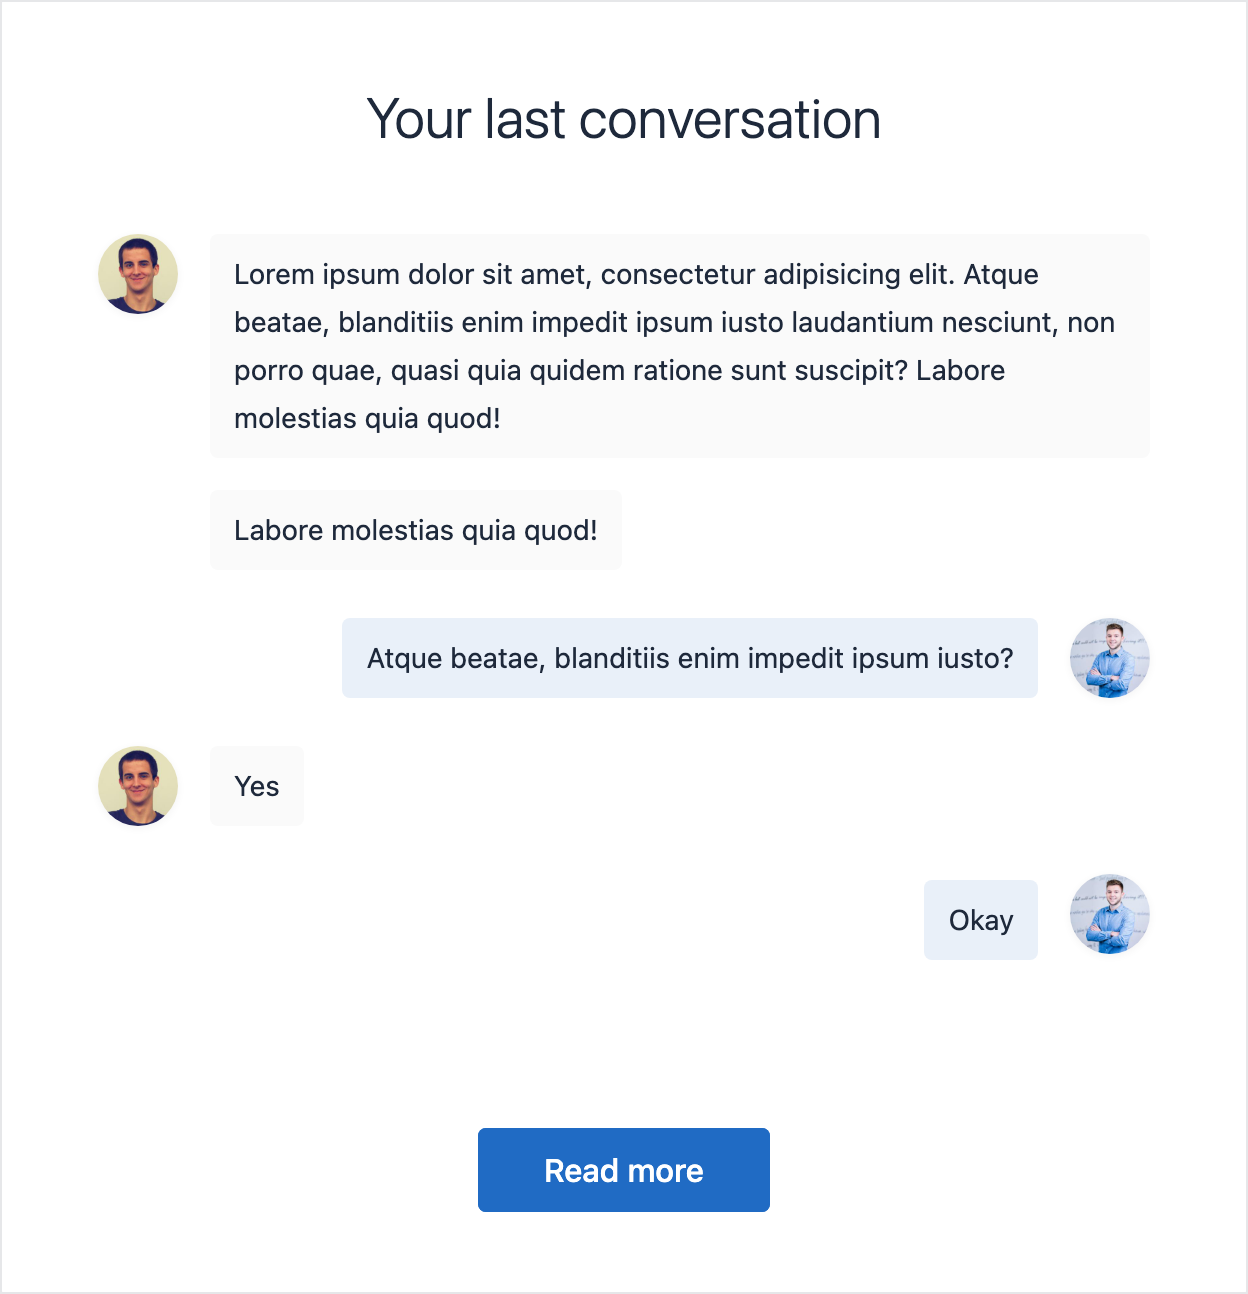 Email template with the last conversation